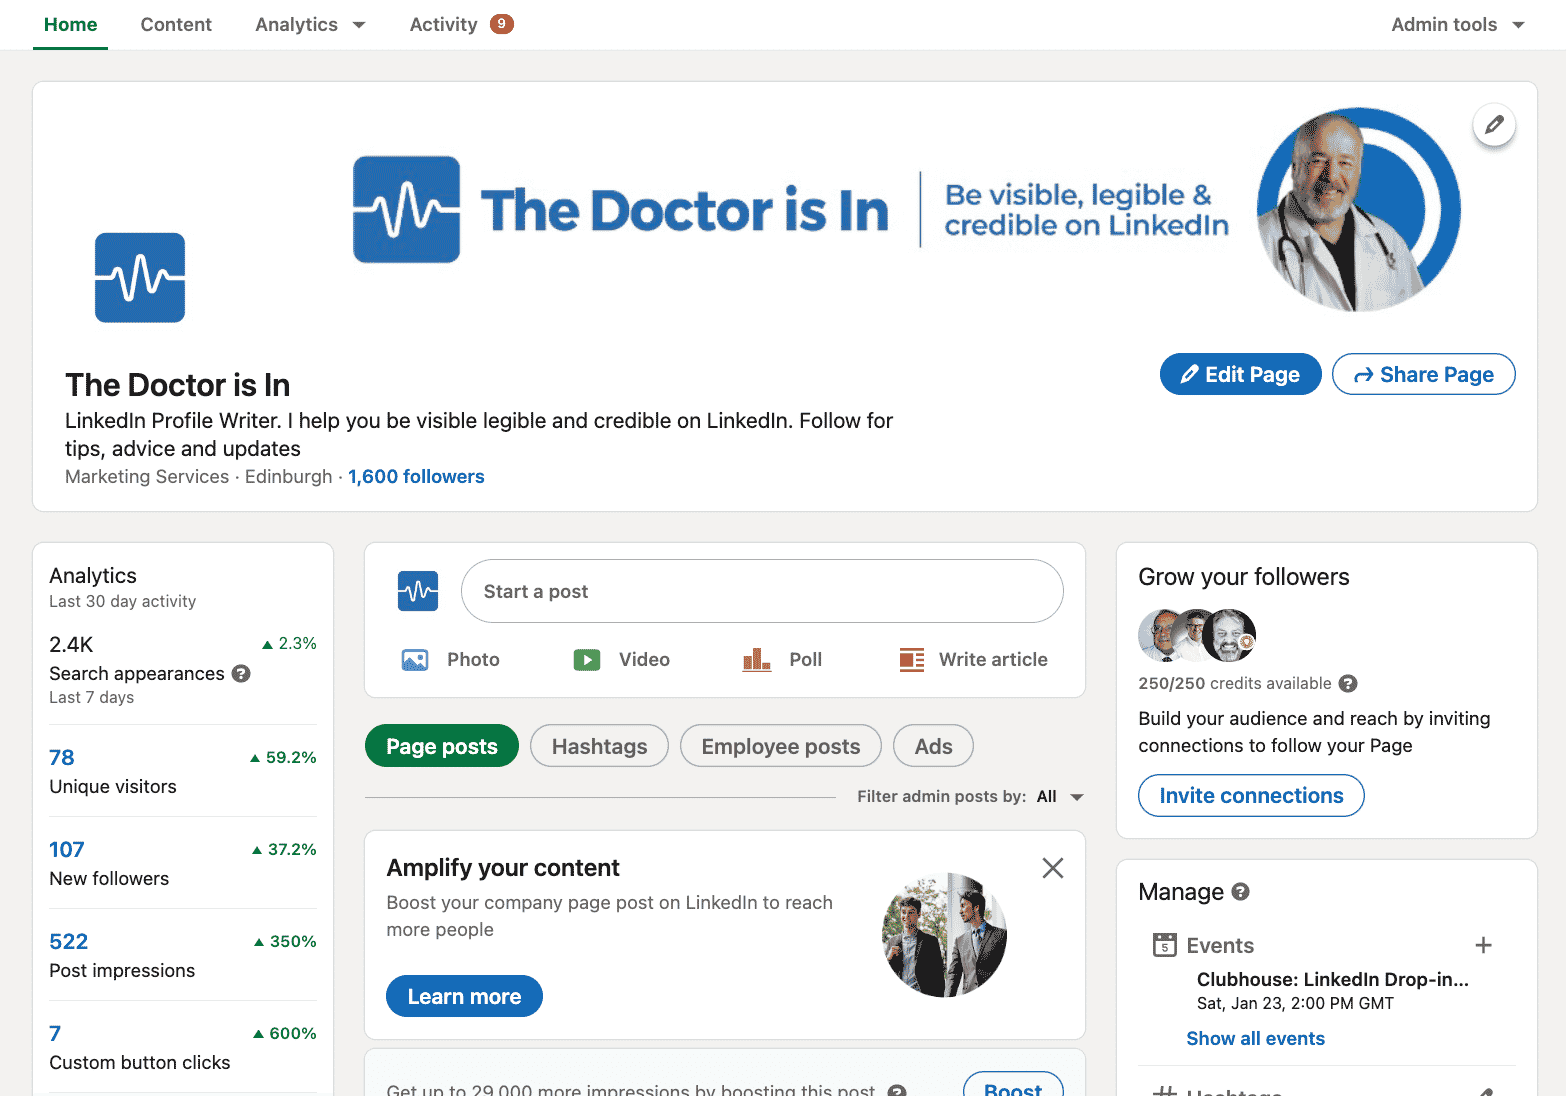 The Doctor is In Company Page on LinkedIn - Admin View